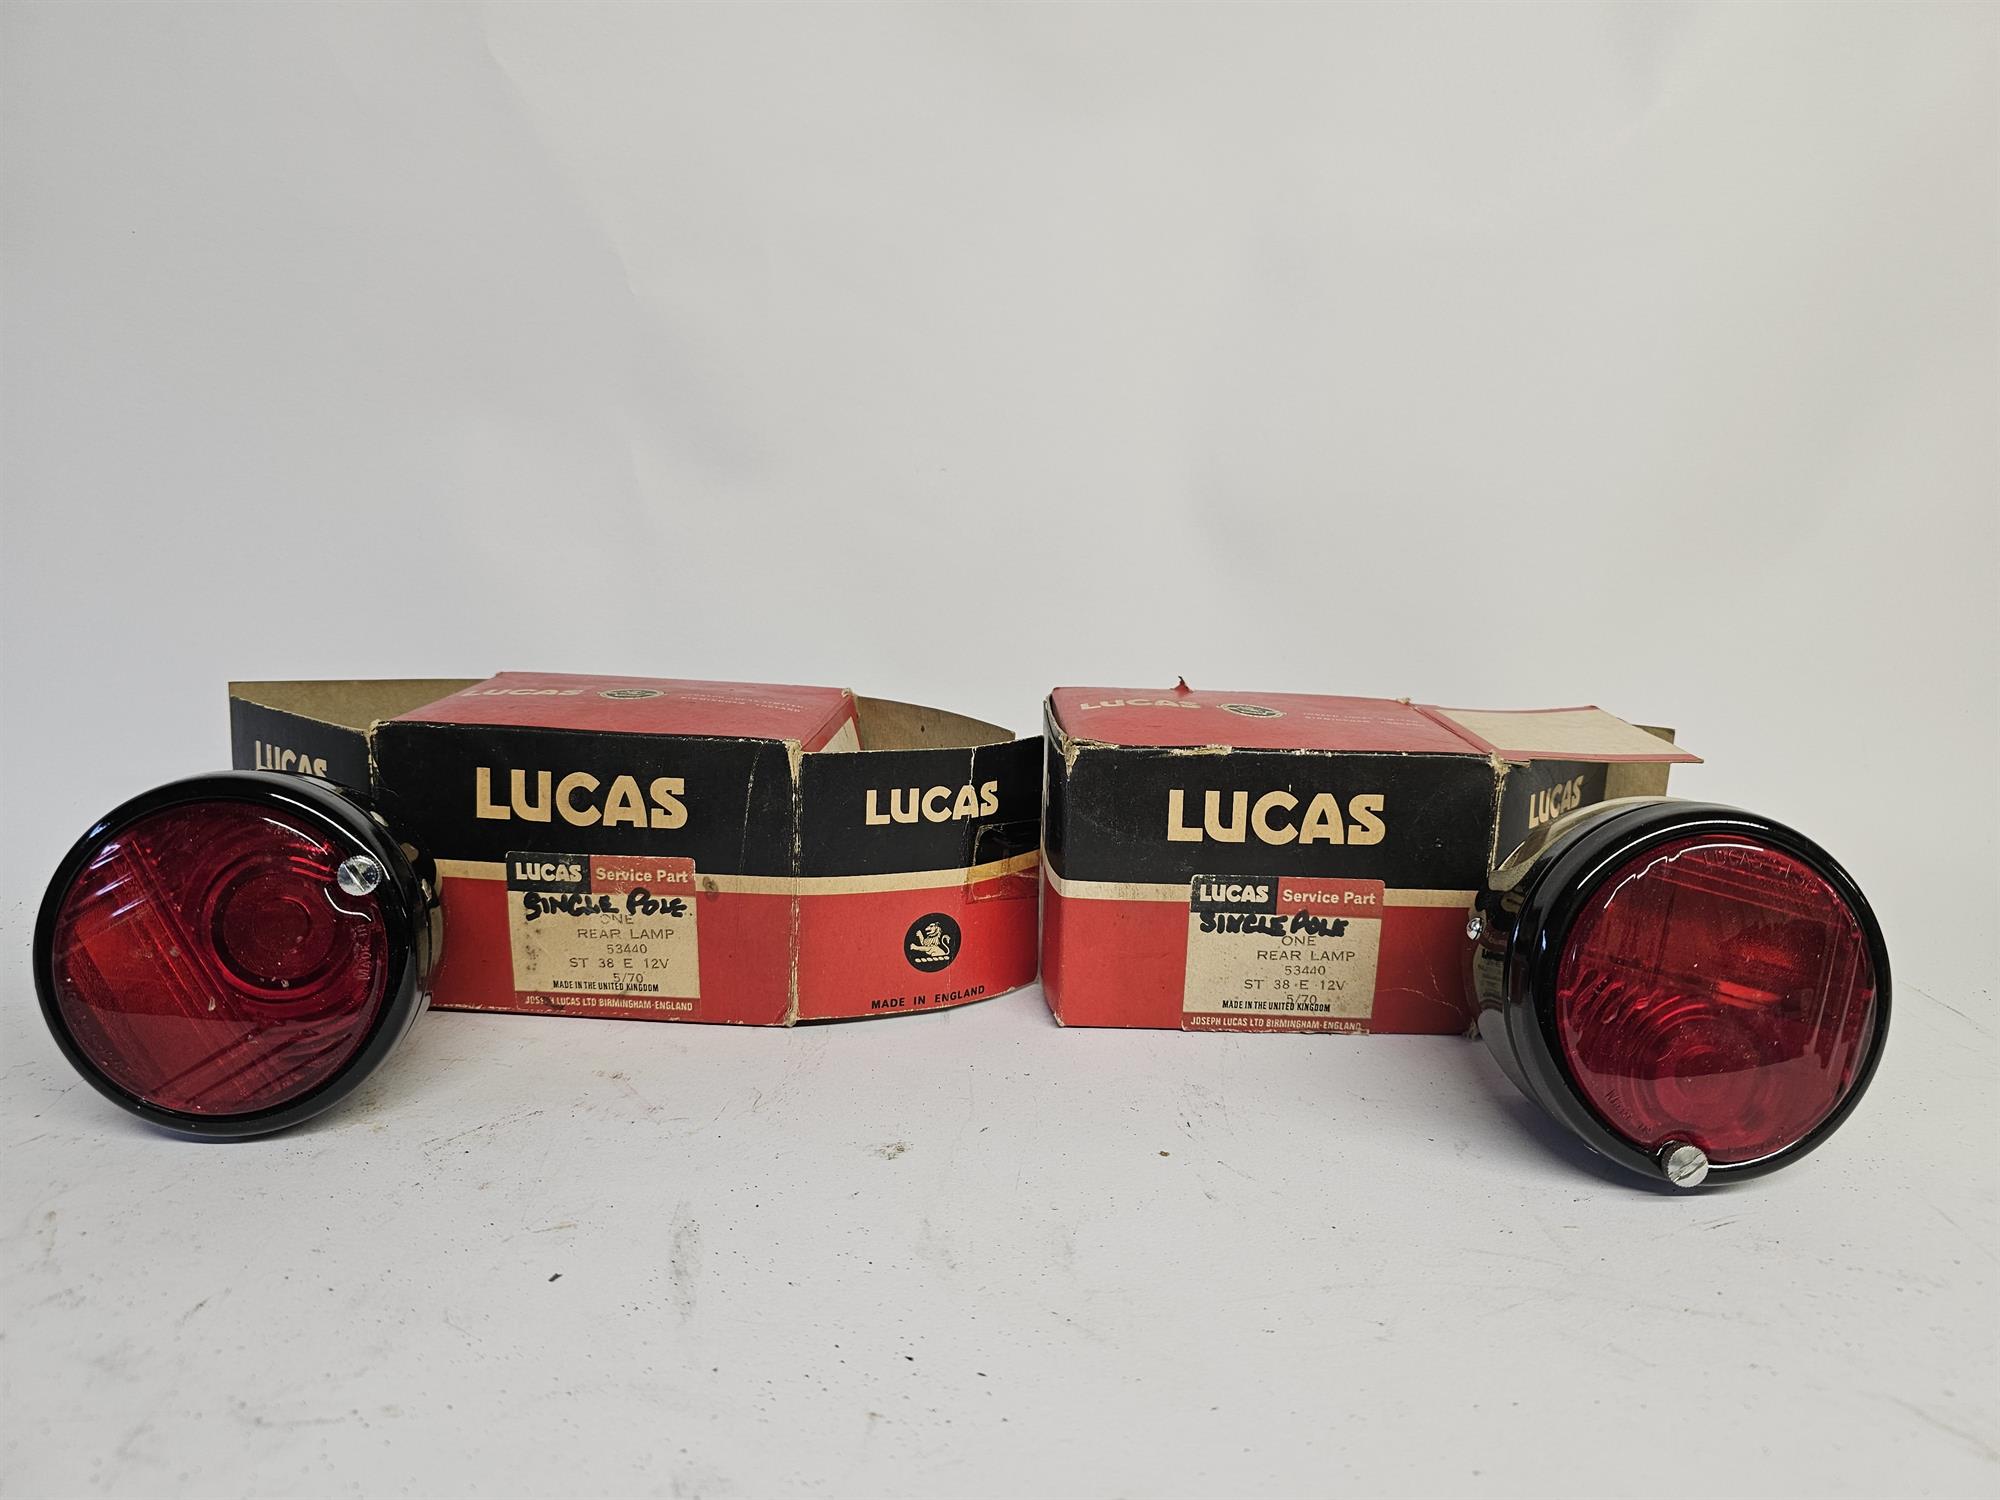 Lucas - Pair of Lucas light stone guard screen covers boxed, together with two Lucas red rear lamps